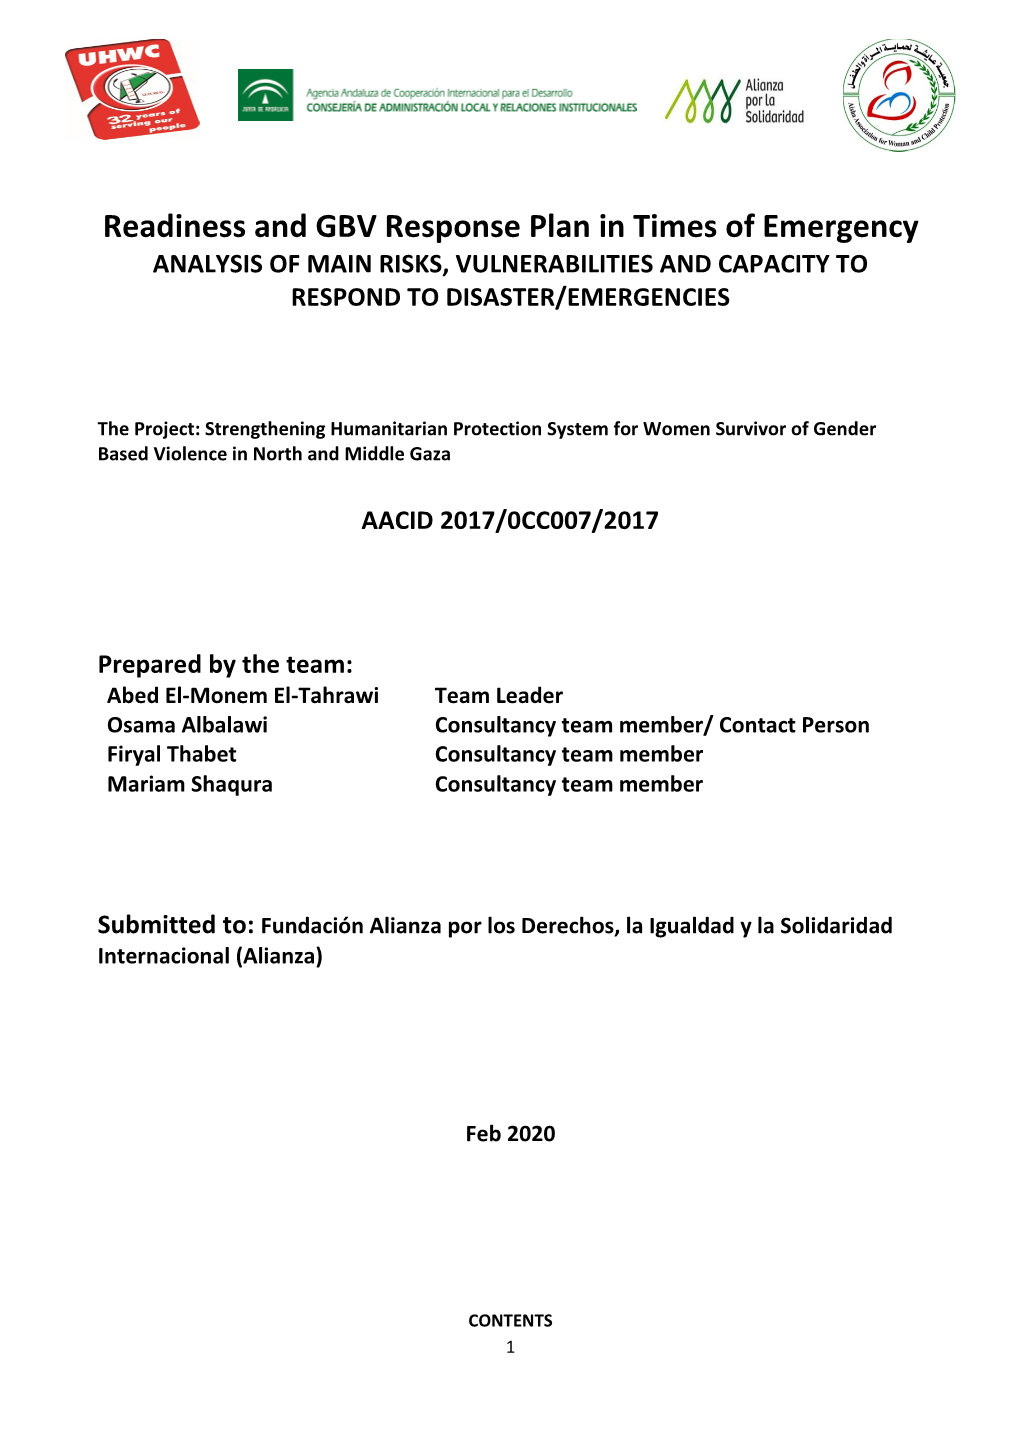 Readiness and GBV Response Plan in Times of Emergency ANALYSIS of MAIN RISKS, VULNERABILITIES and CAPACITY to RESPOND to DISASTER/EMERGENCIES